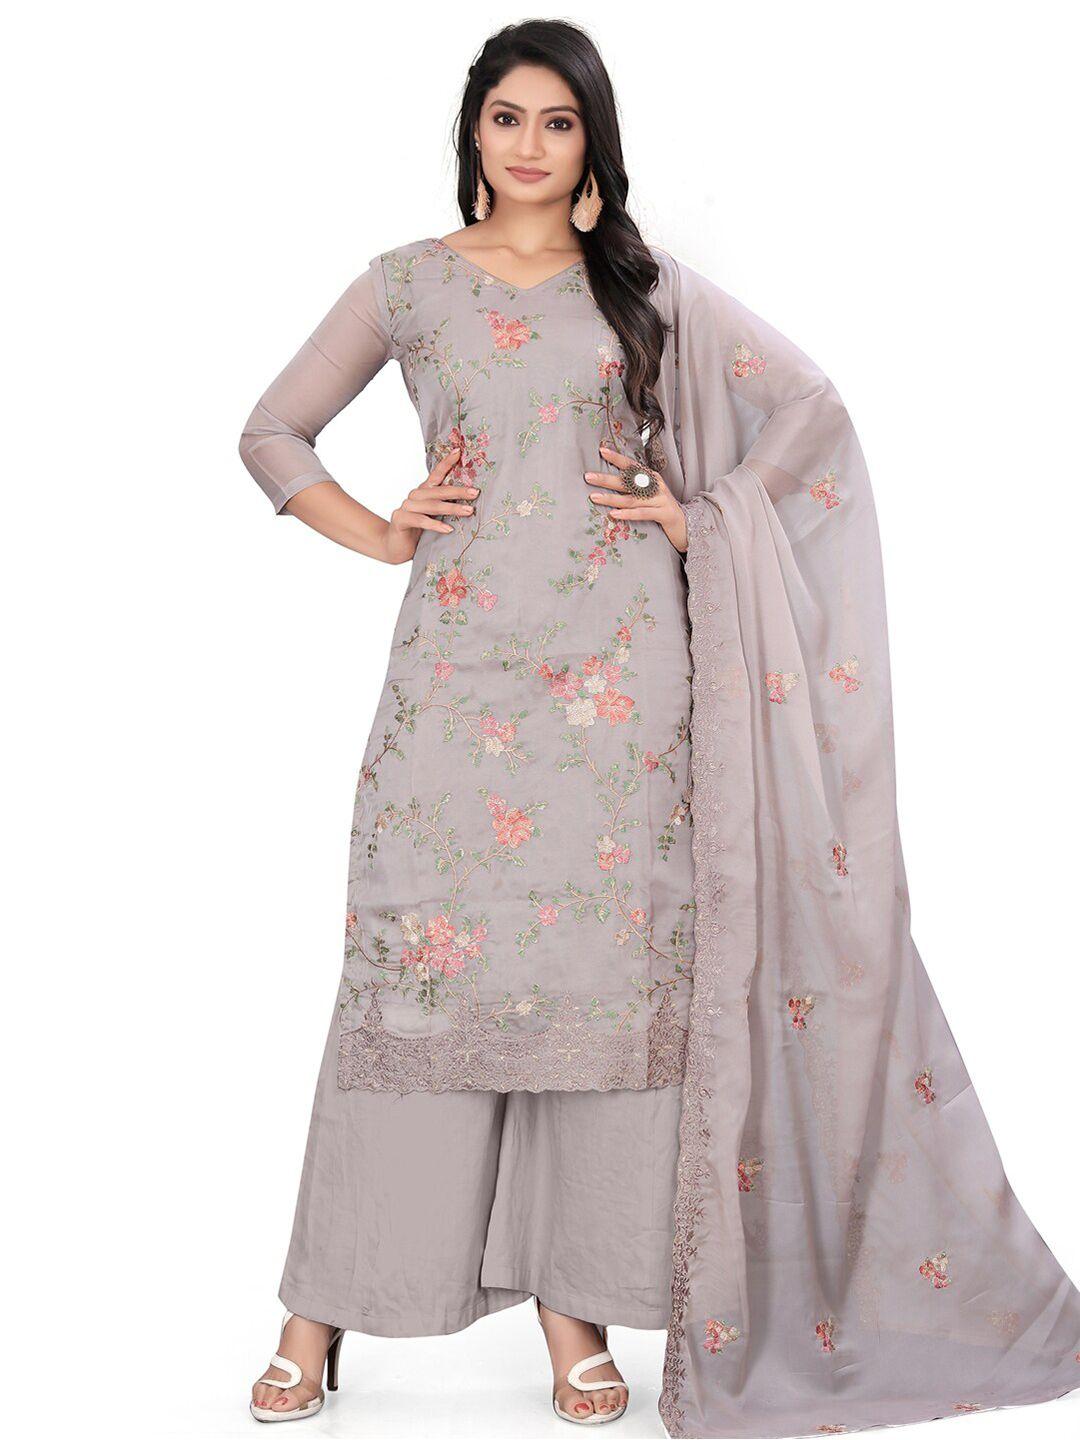 stylee lifestyle floral embroidered unstitched dress material